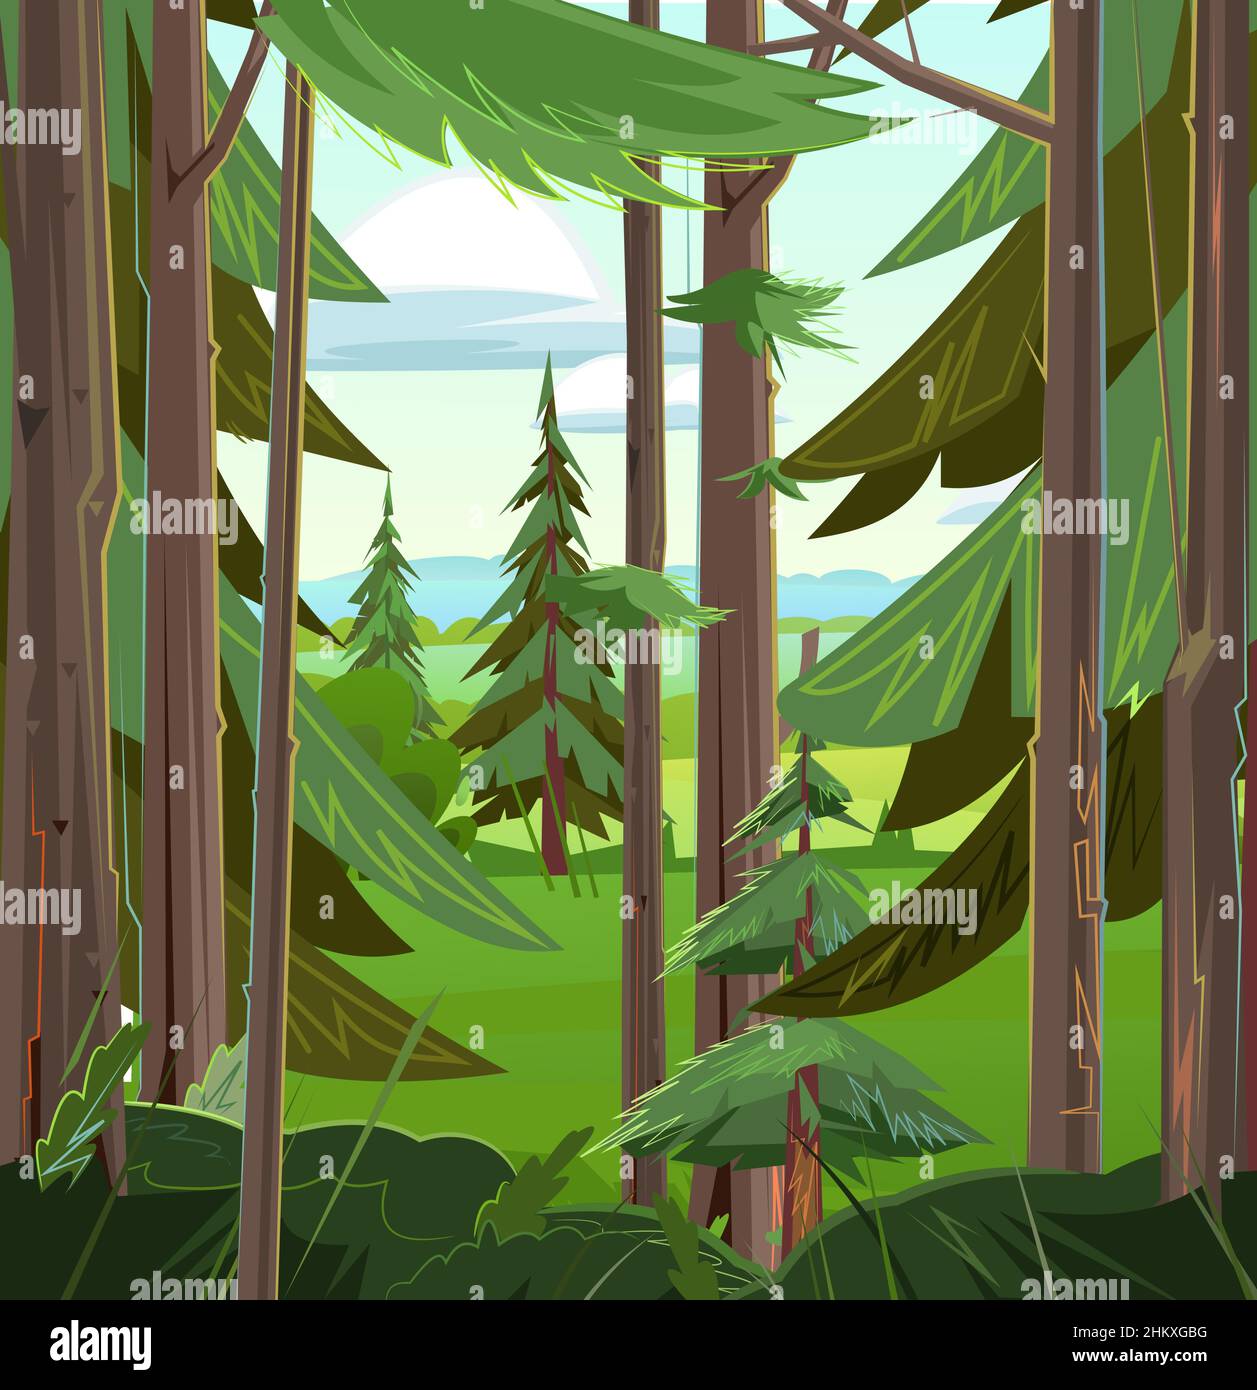 Pine branches in coniferous forest. Beautiful summer landscape with trees. Green pines and ate. Illustration in cartoon style flat design. Vector Stock Vector